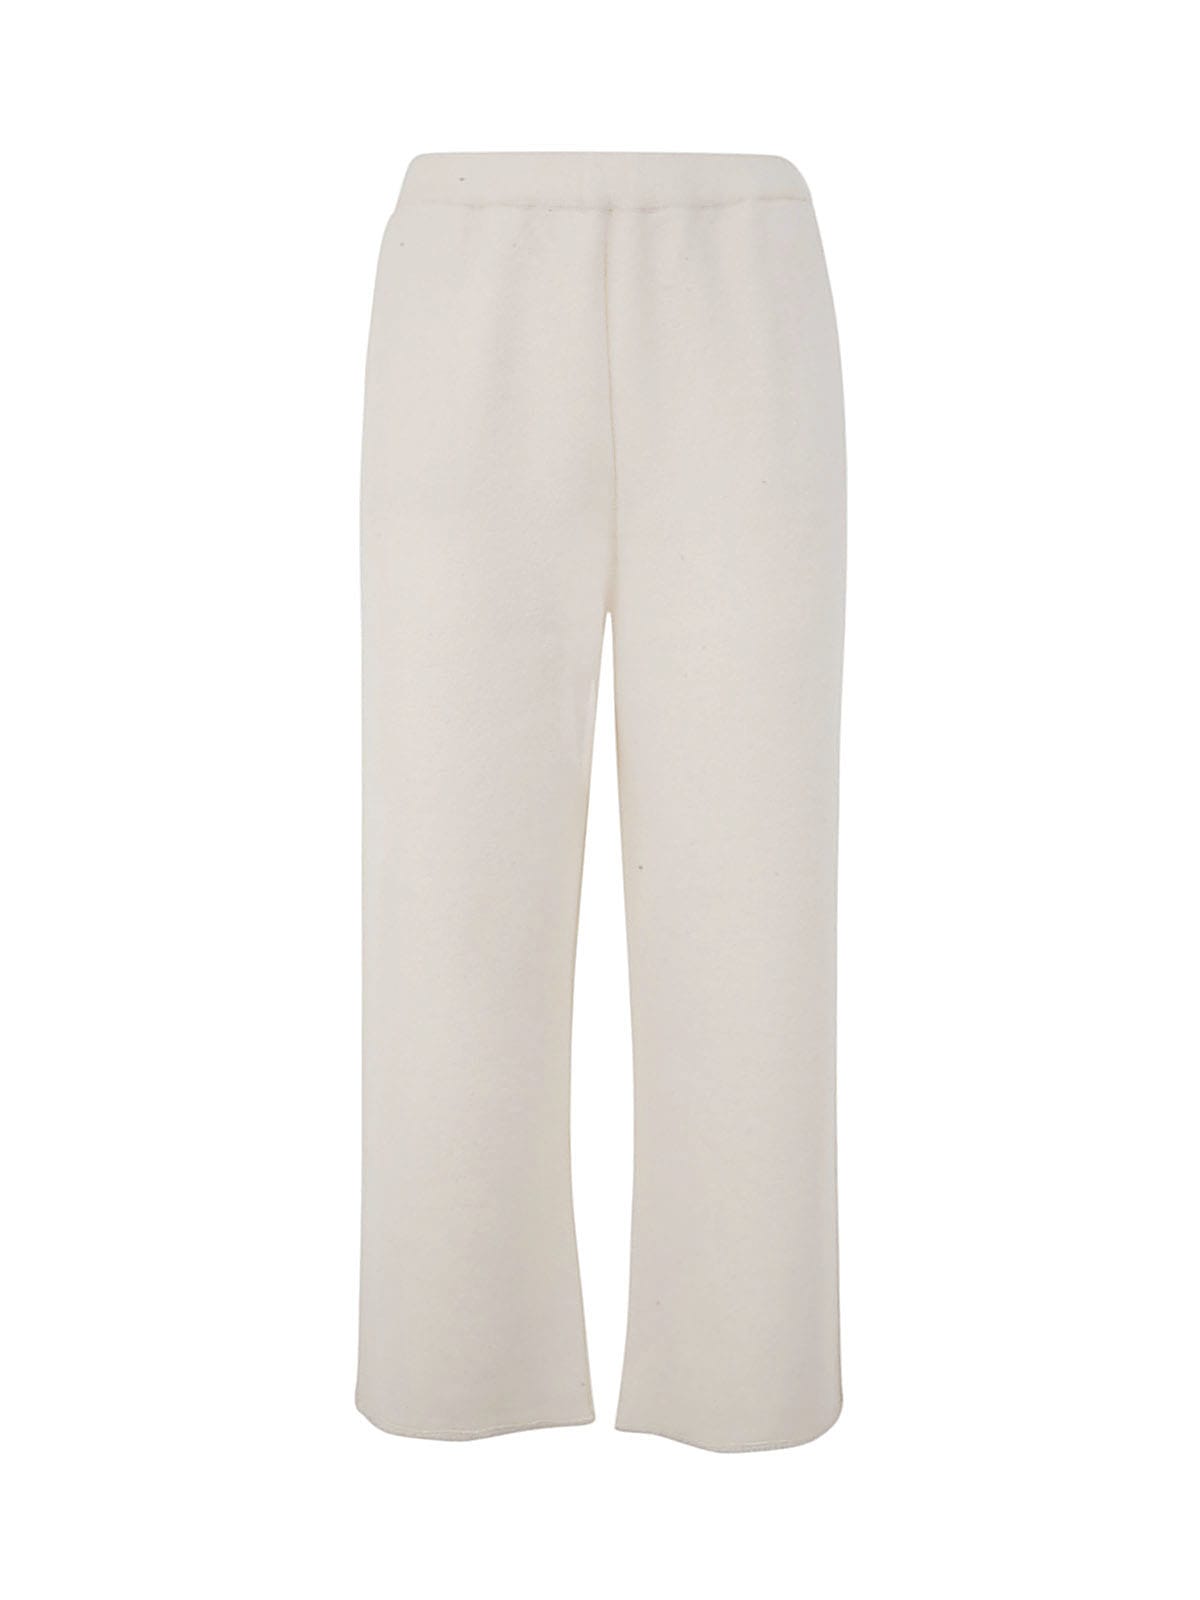 Oyuna Knitted Jacquard Cropped Trousers In Ivory